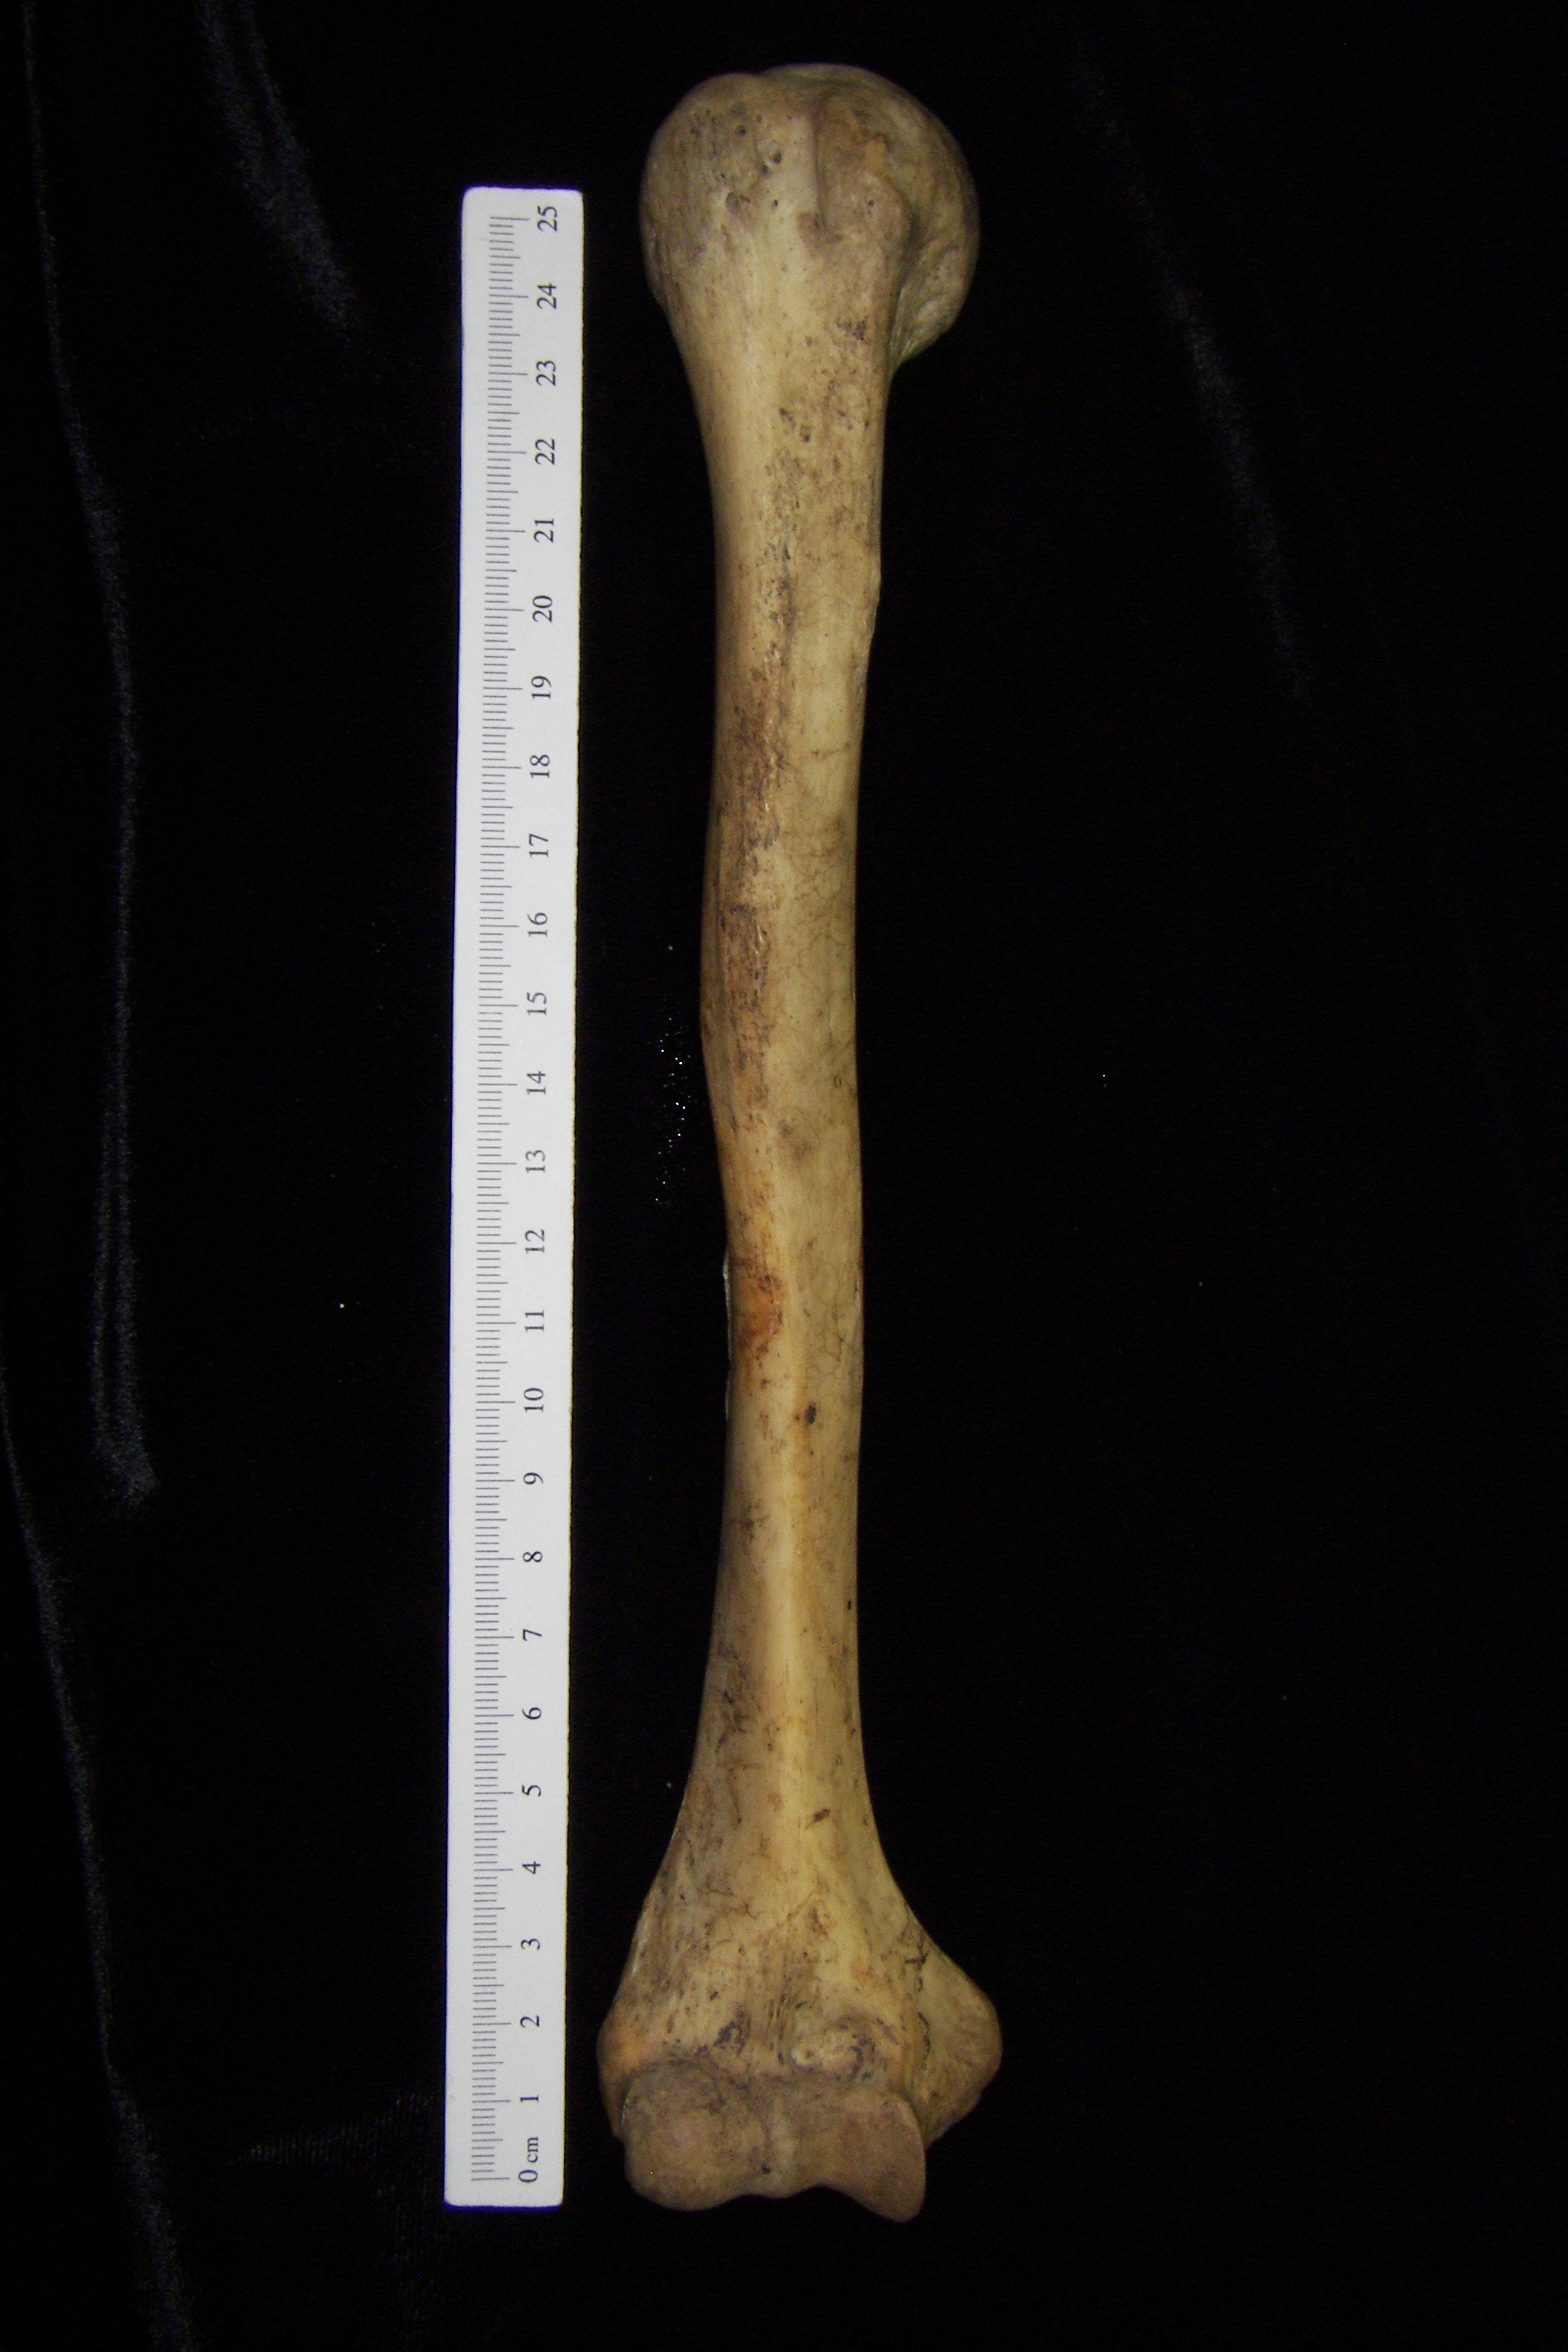 Human right humerus, lateral view